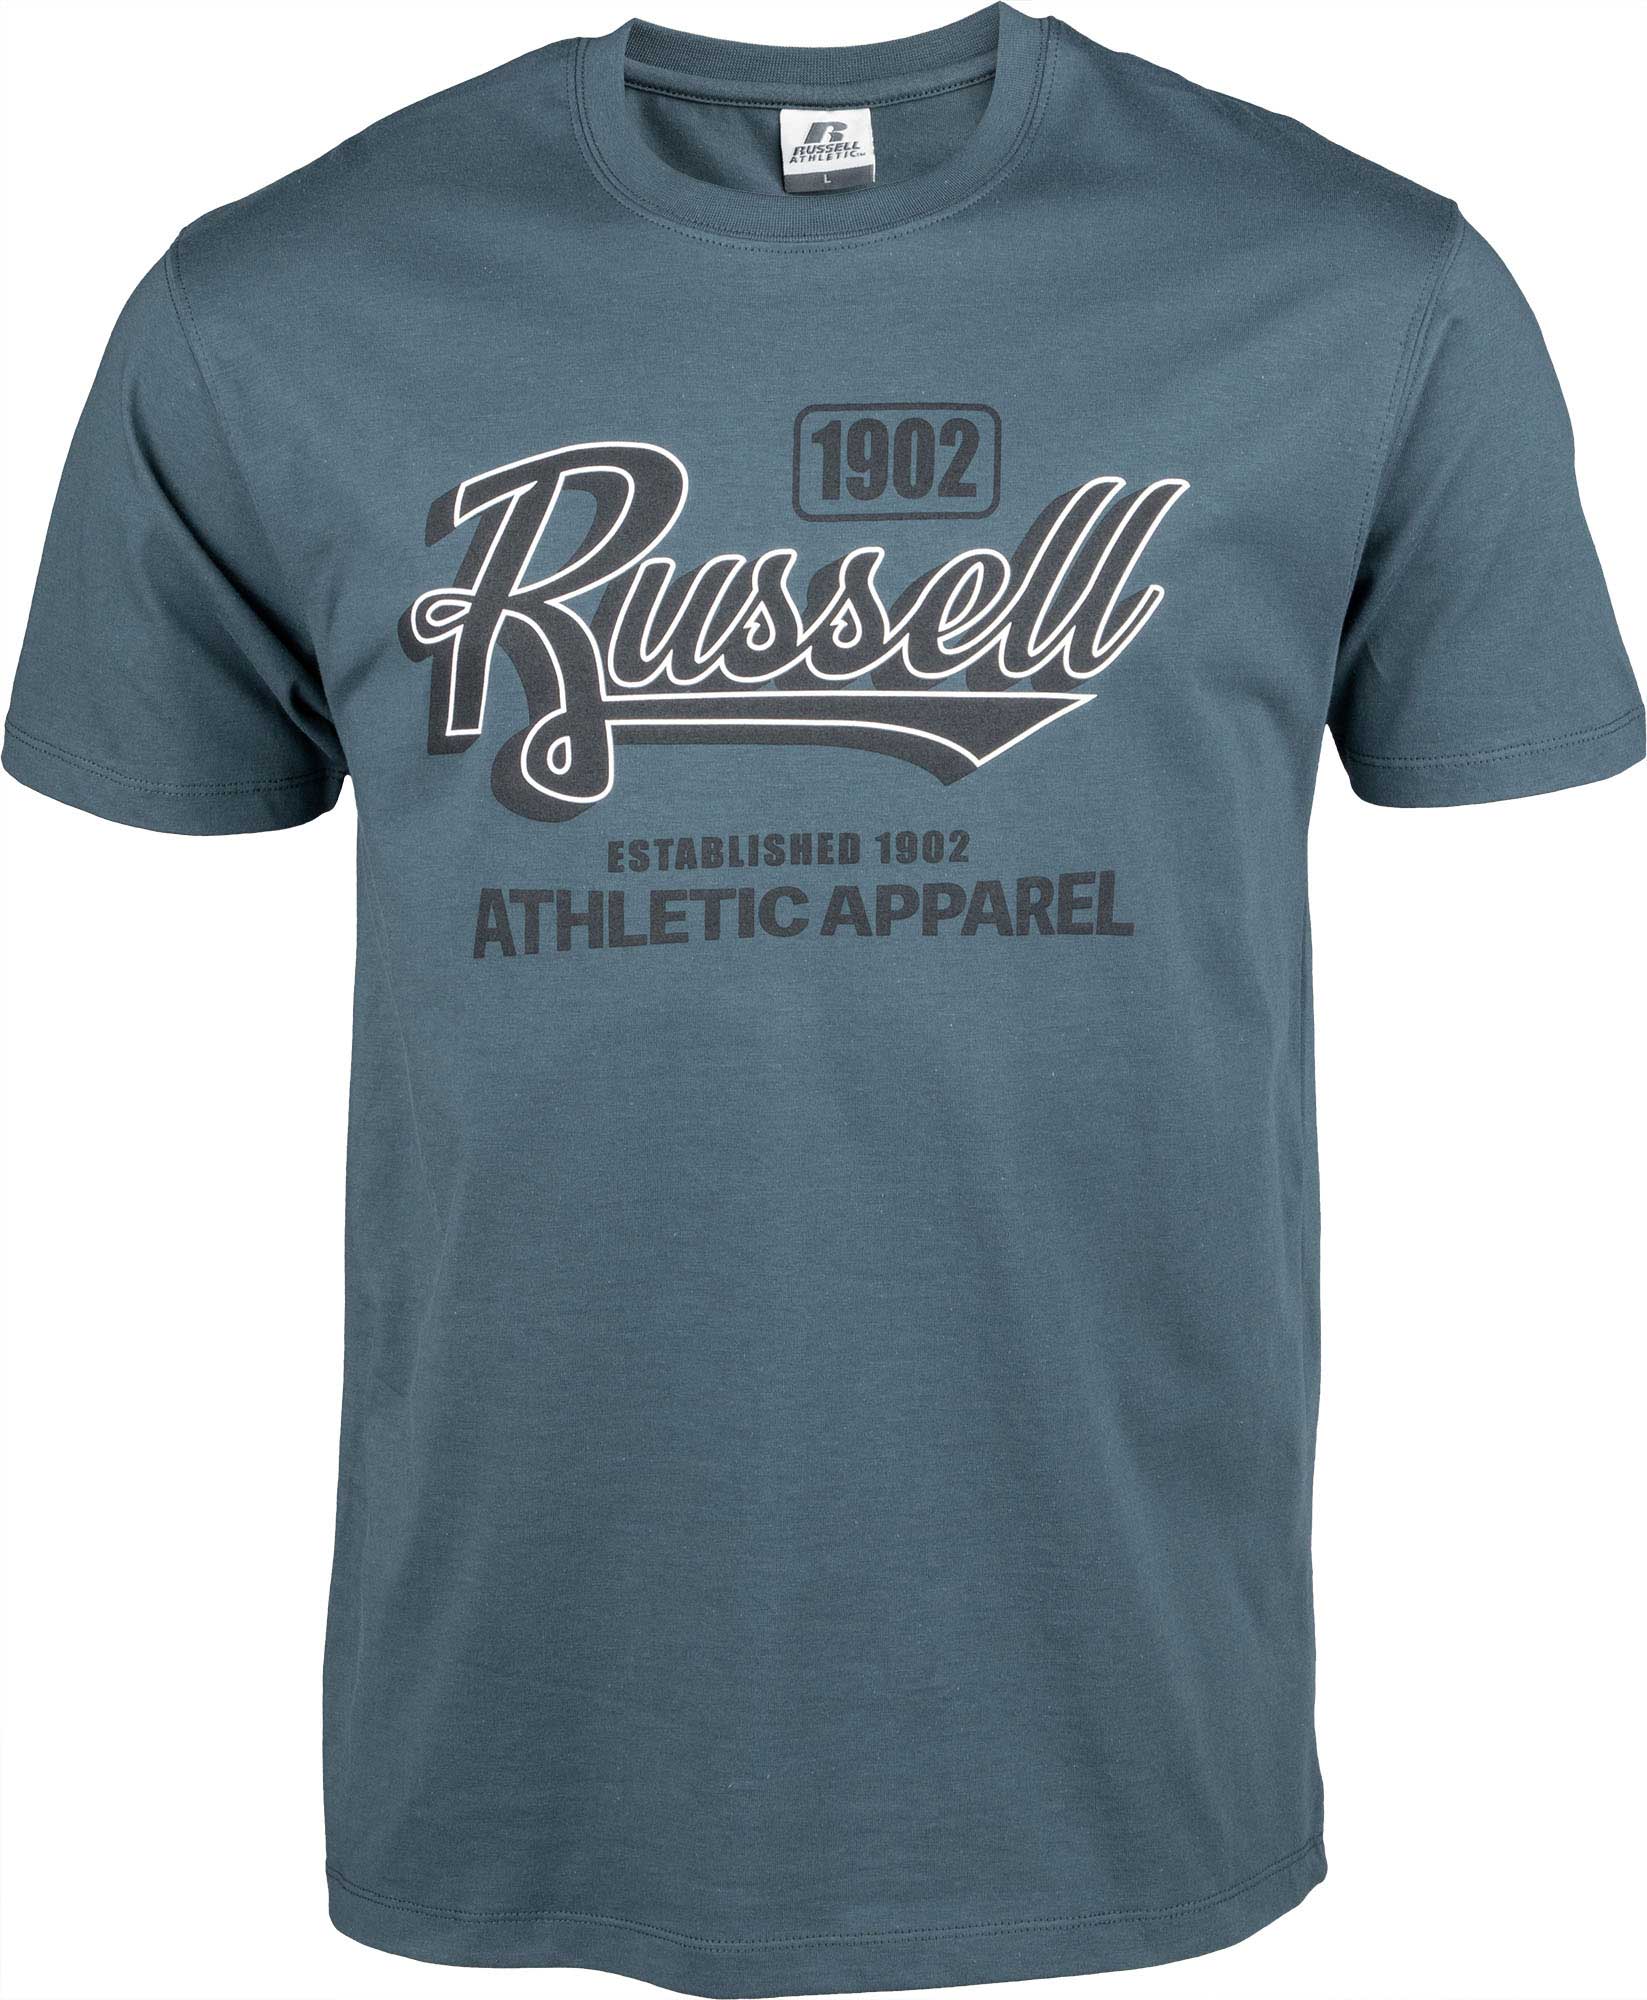 Russell Athletic 1902 MAN | sportisimo.cz